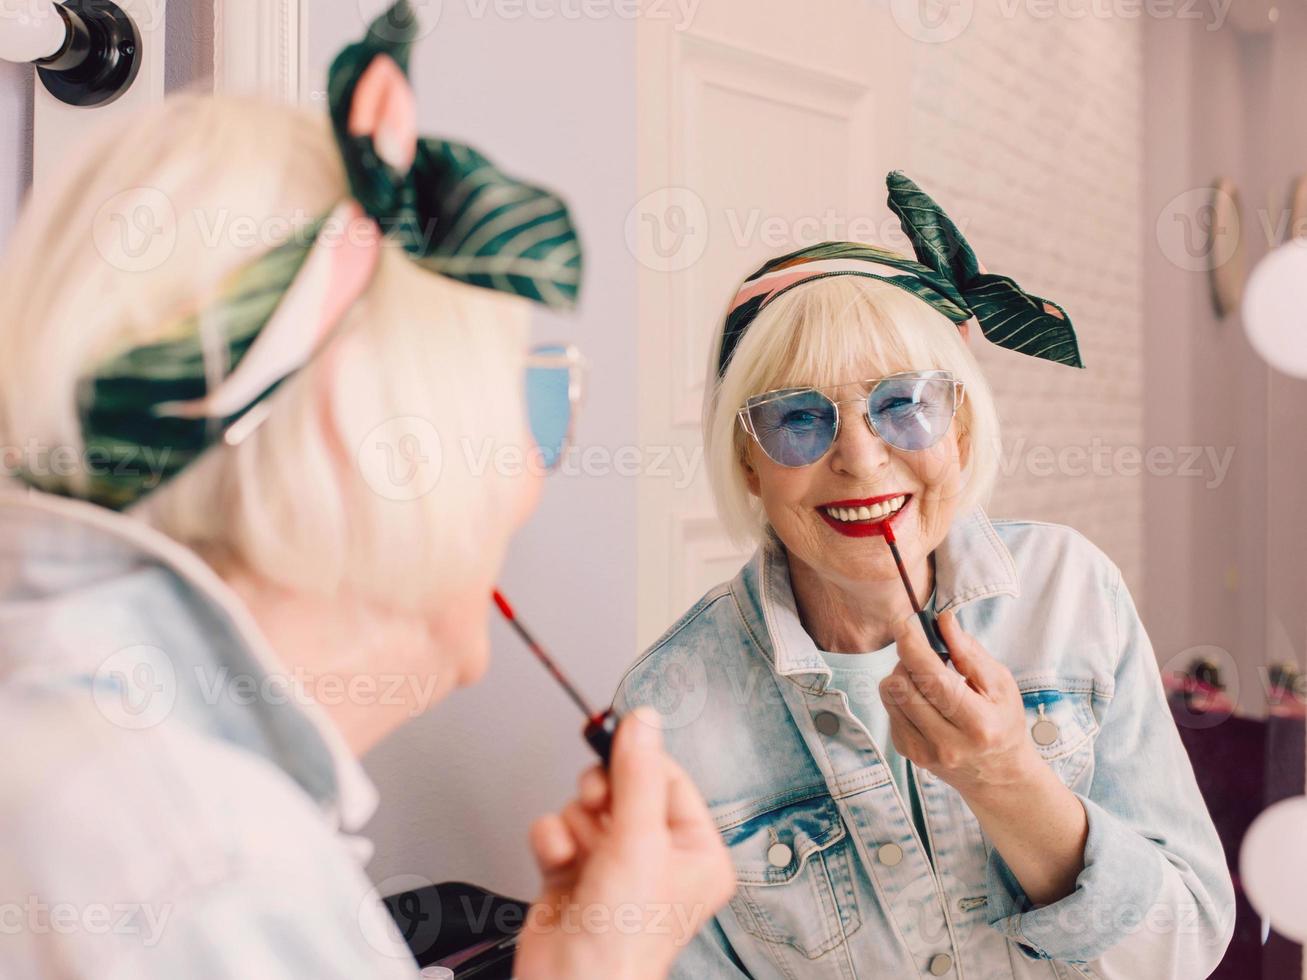 Smiling elderly senior stylish woman in blue sunglasses and jeans jacket using red lipstick by the mirror in stylish loft interior. Style, fashion, make up, anti age concept photo